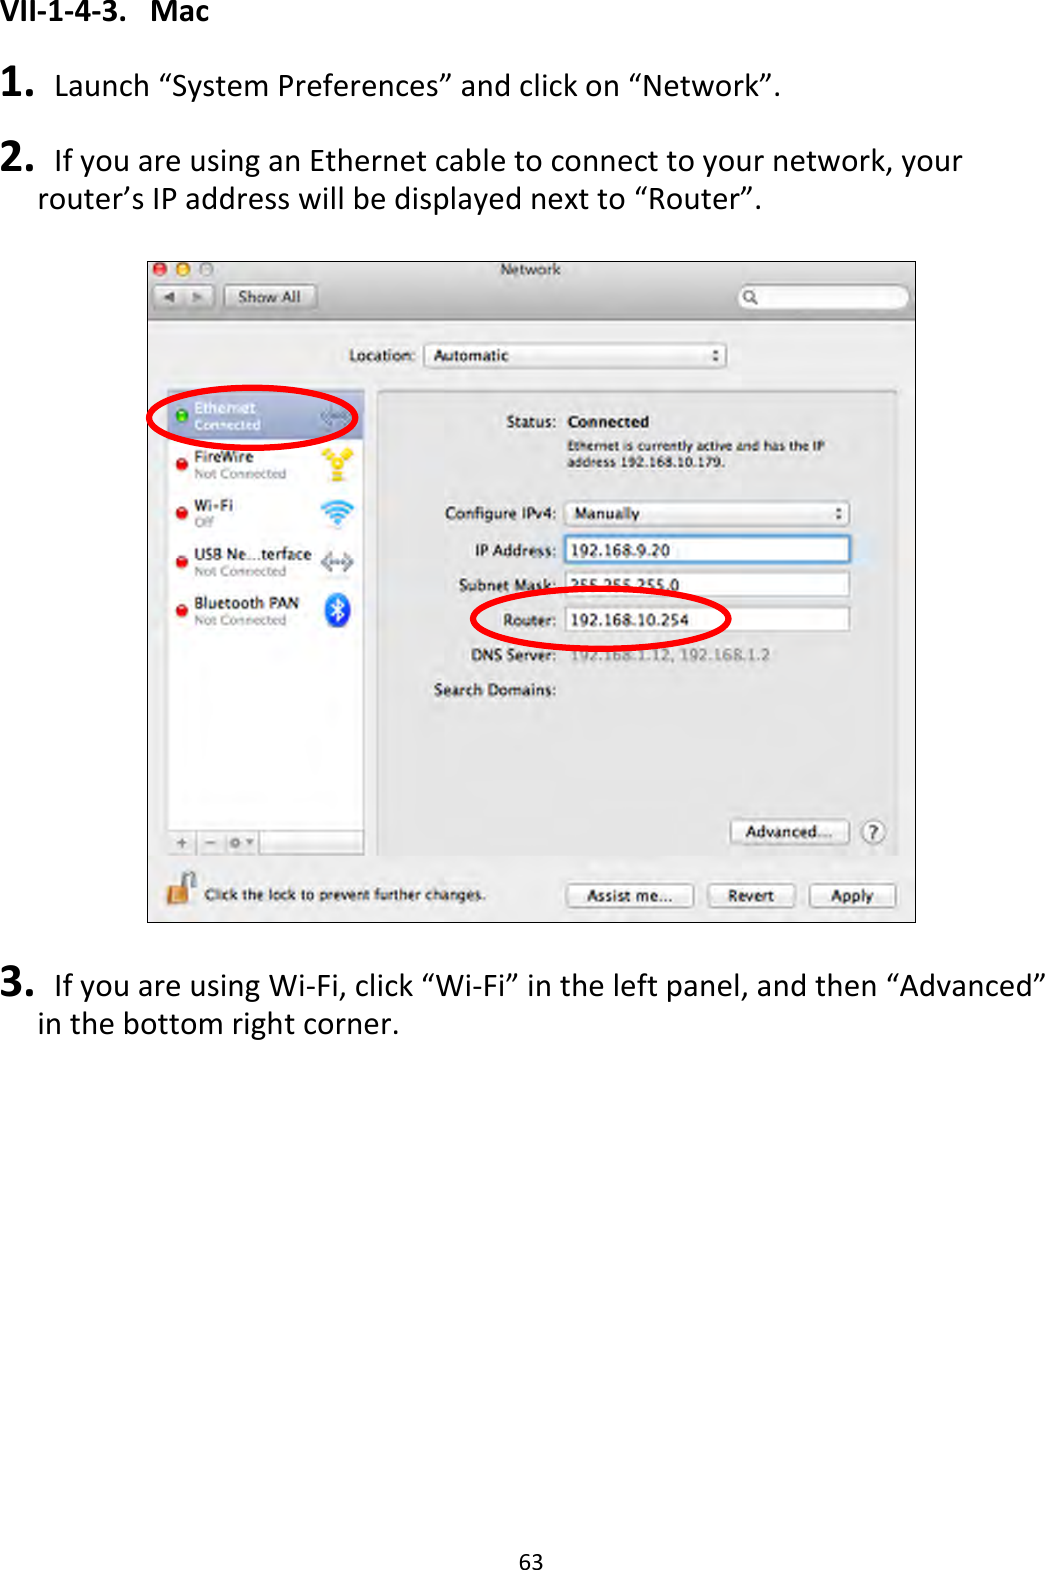 63 VII-1-4-3.  Mac  1.   Launch “System Preferences” and click on “Network”.  2.   If you are using an Ethernet cable to connect to your network, your router’s IP address will be displayed next to “Router”.    3.   If you are using Wi-Fi, click “Wi-Fi” in the left panel, and then “Advanced” in the bottom right corner.  